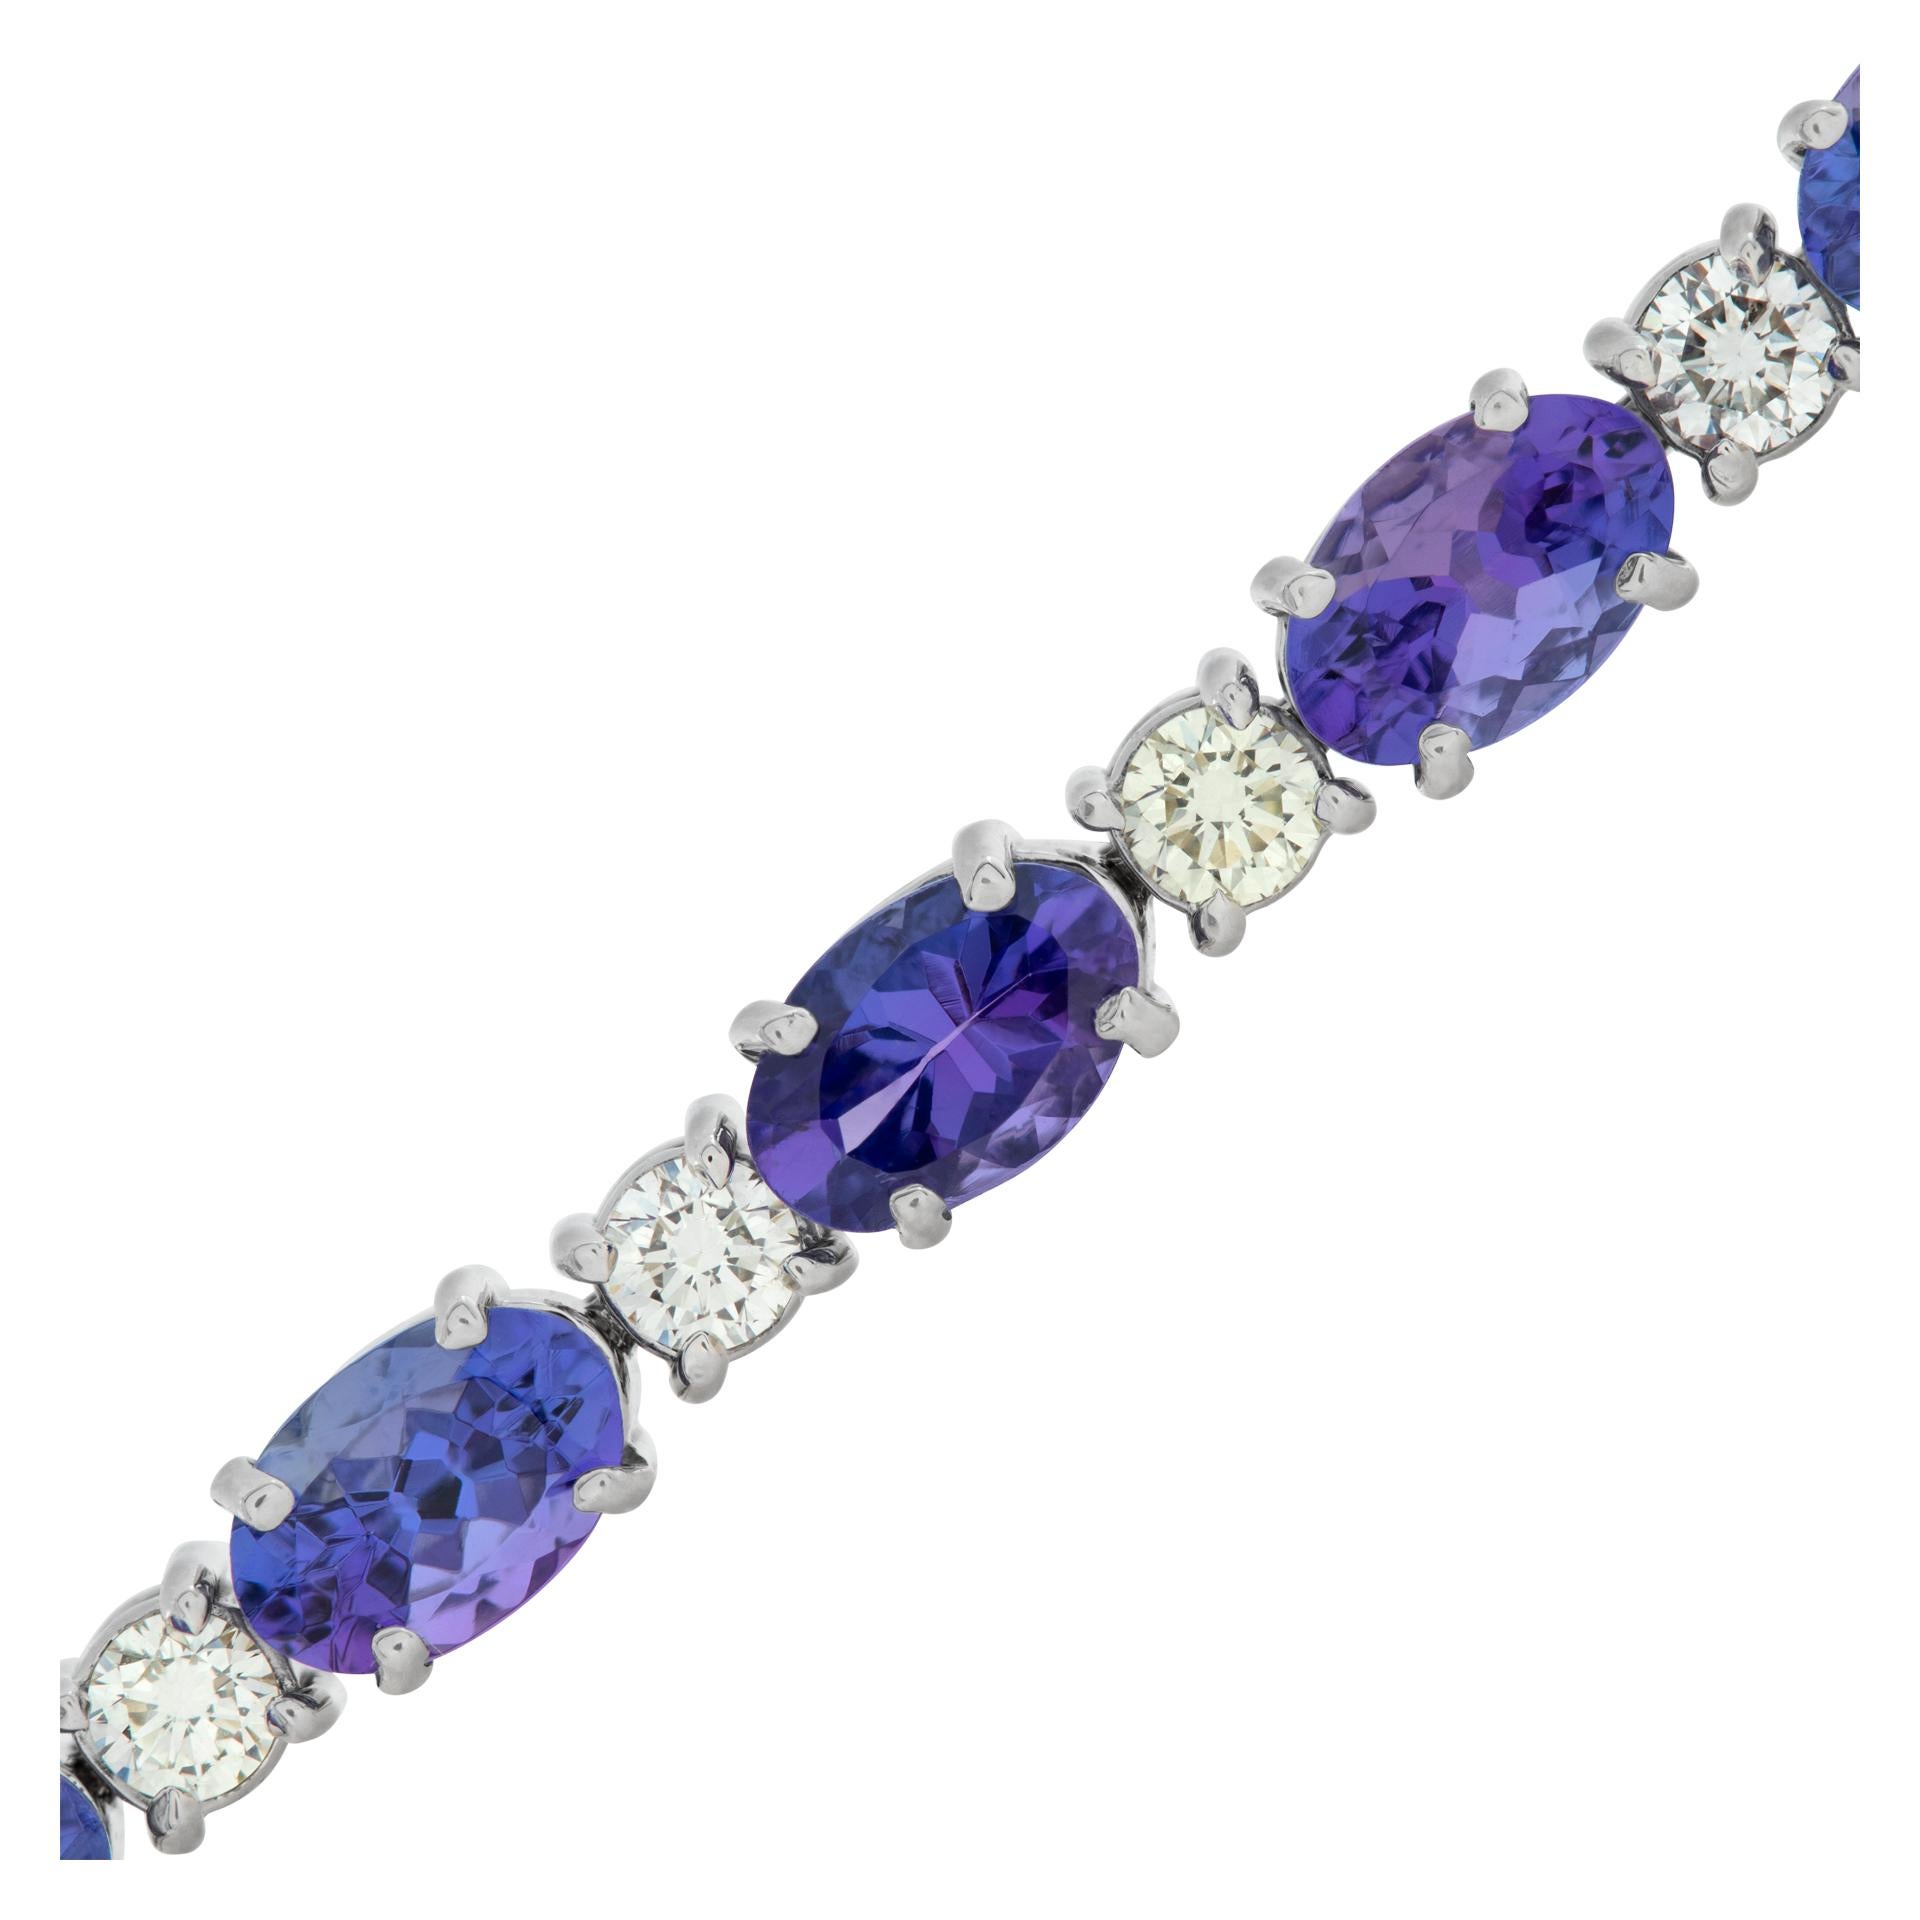 Tanzanite and diamond line bracelet in 14k white gold with 9.50 carats in oval tanzanites and 1.45 carats in round diamonds (H-I color, SI clarity). 7 inch length.